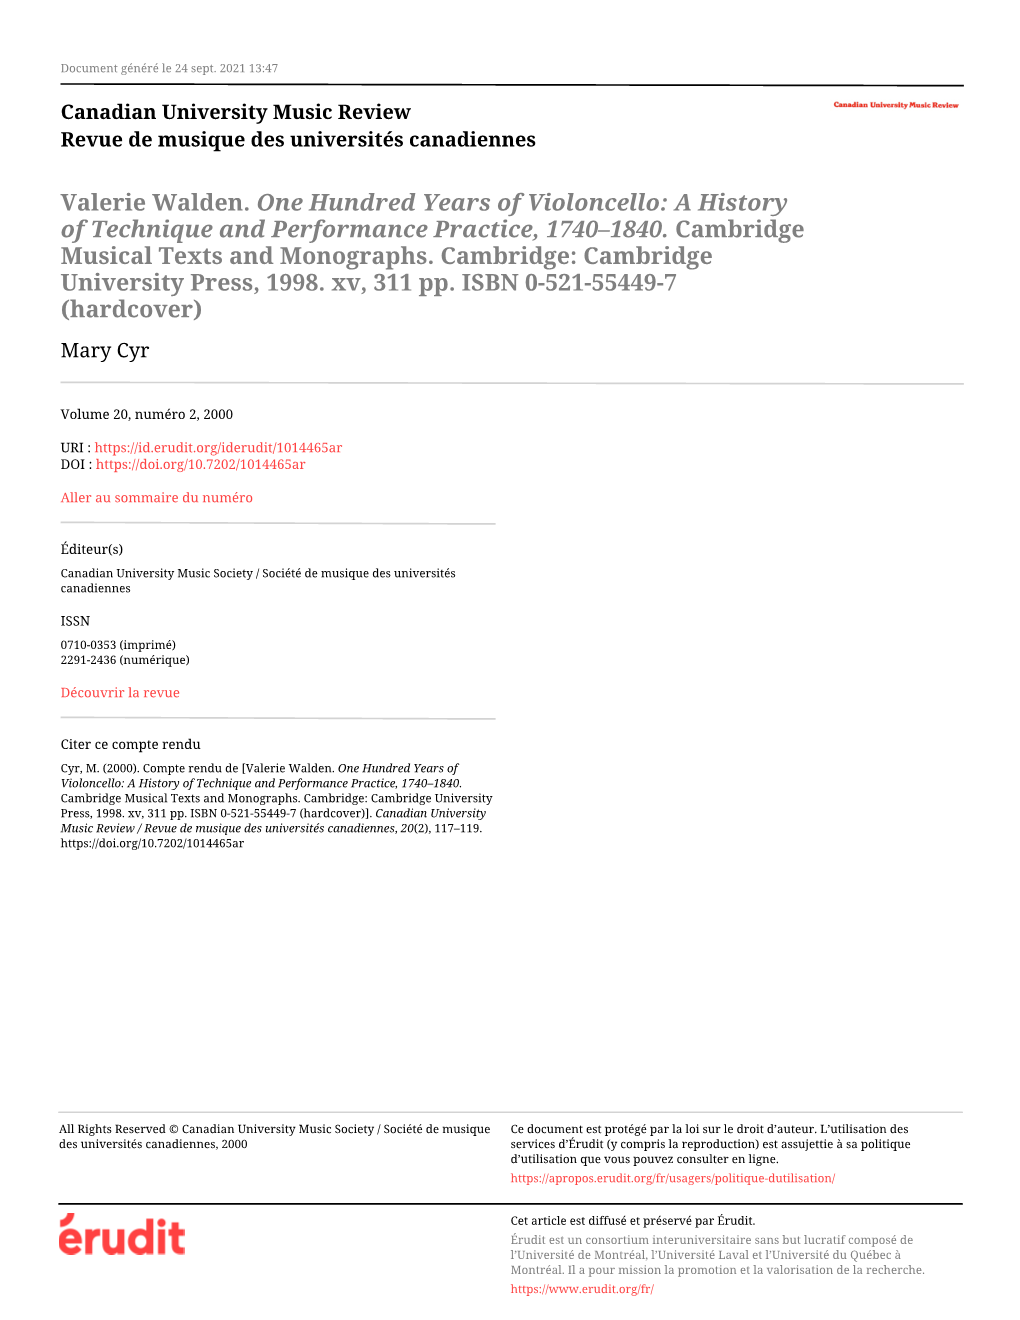 Valerie Walden. One Hundred Years of Violoncello: a History of Technique and Performance Practice, 1740–1840